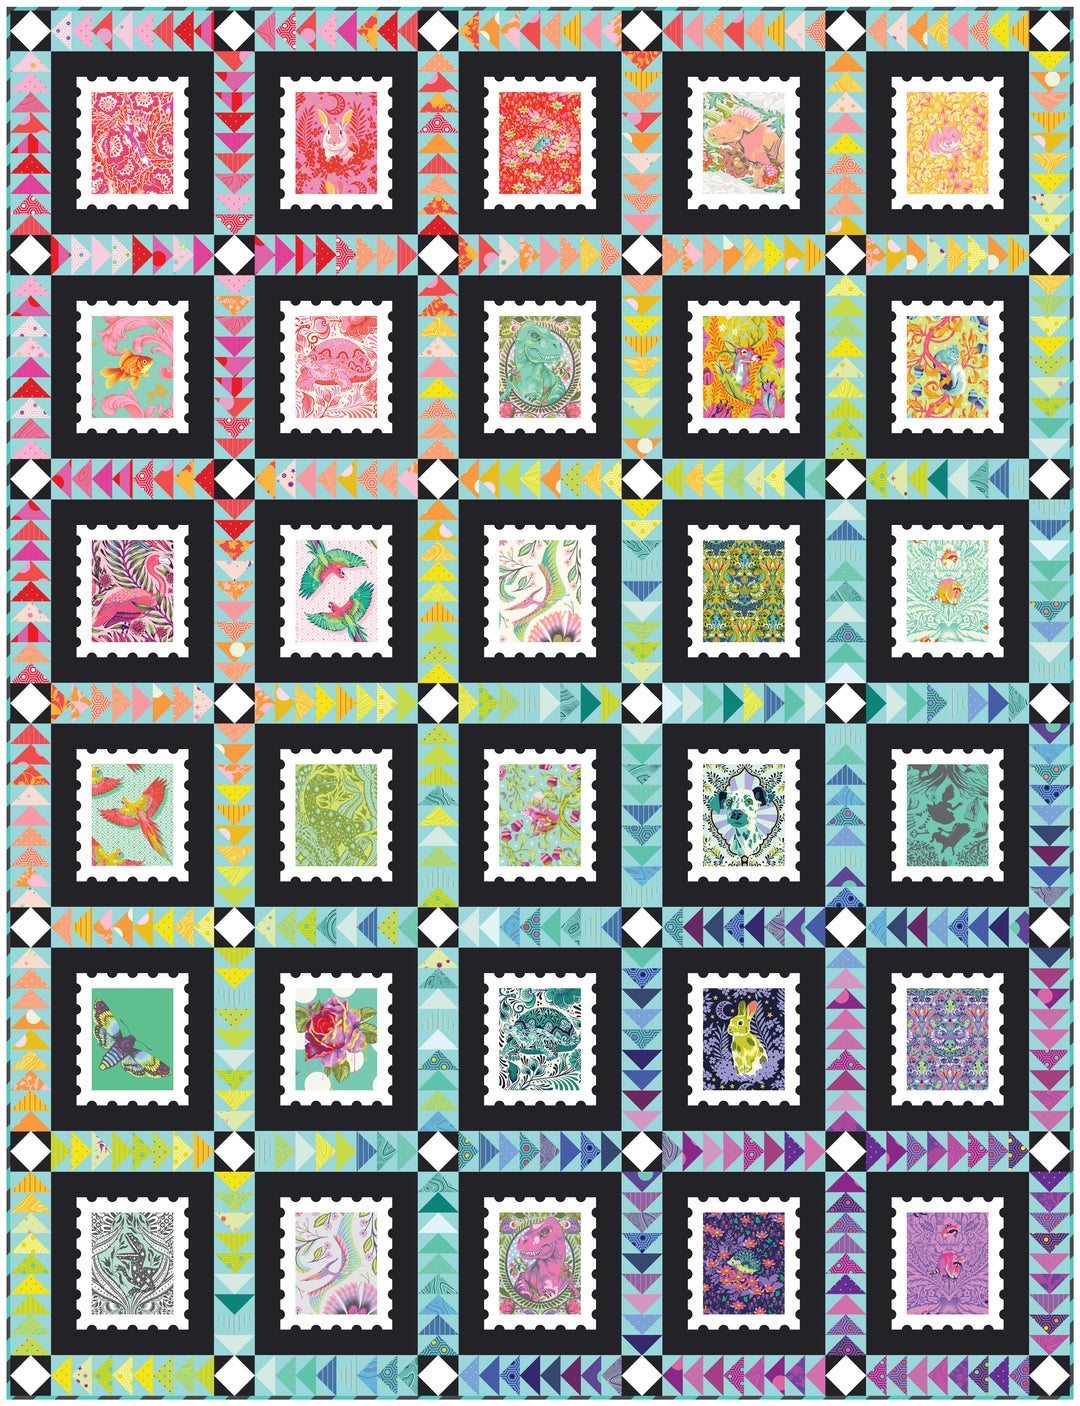 PREORDER - Postage Stamp Quilt Kit featuring Tula Pink and Alison Glass - KITAG.POSTTP